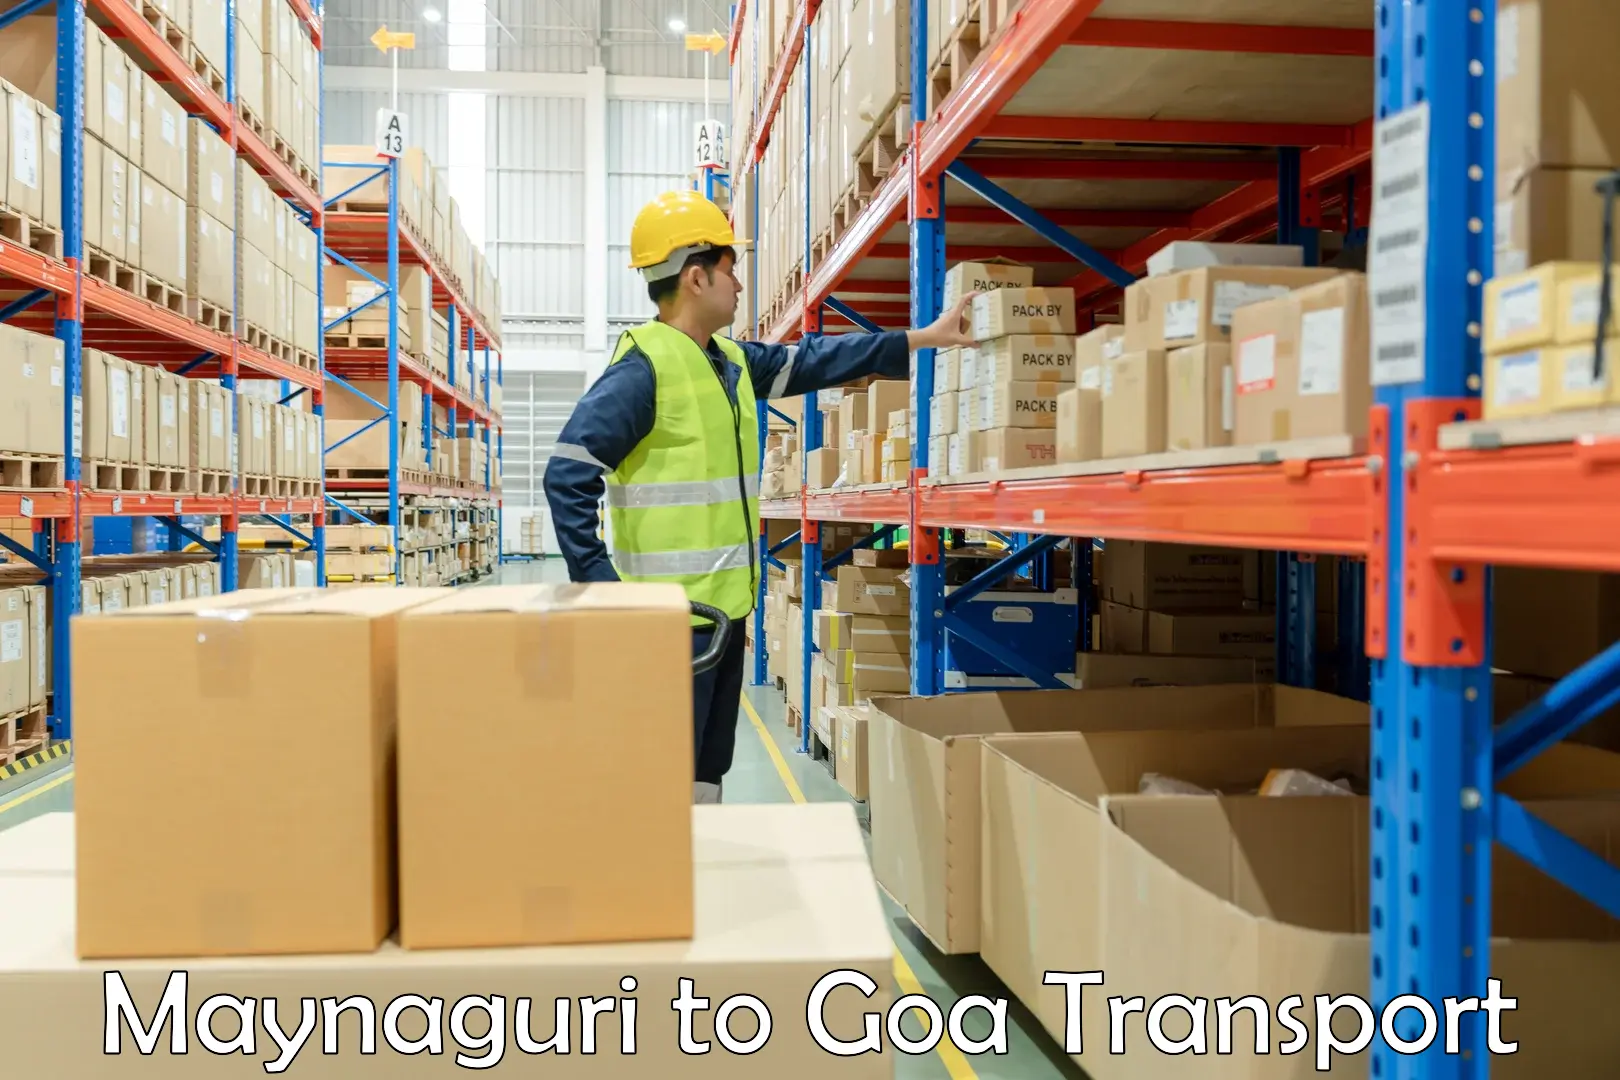 Transport bike from one state to another Maynaguri to Goa